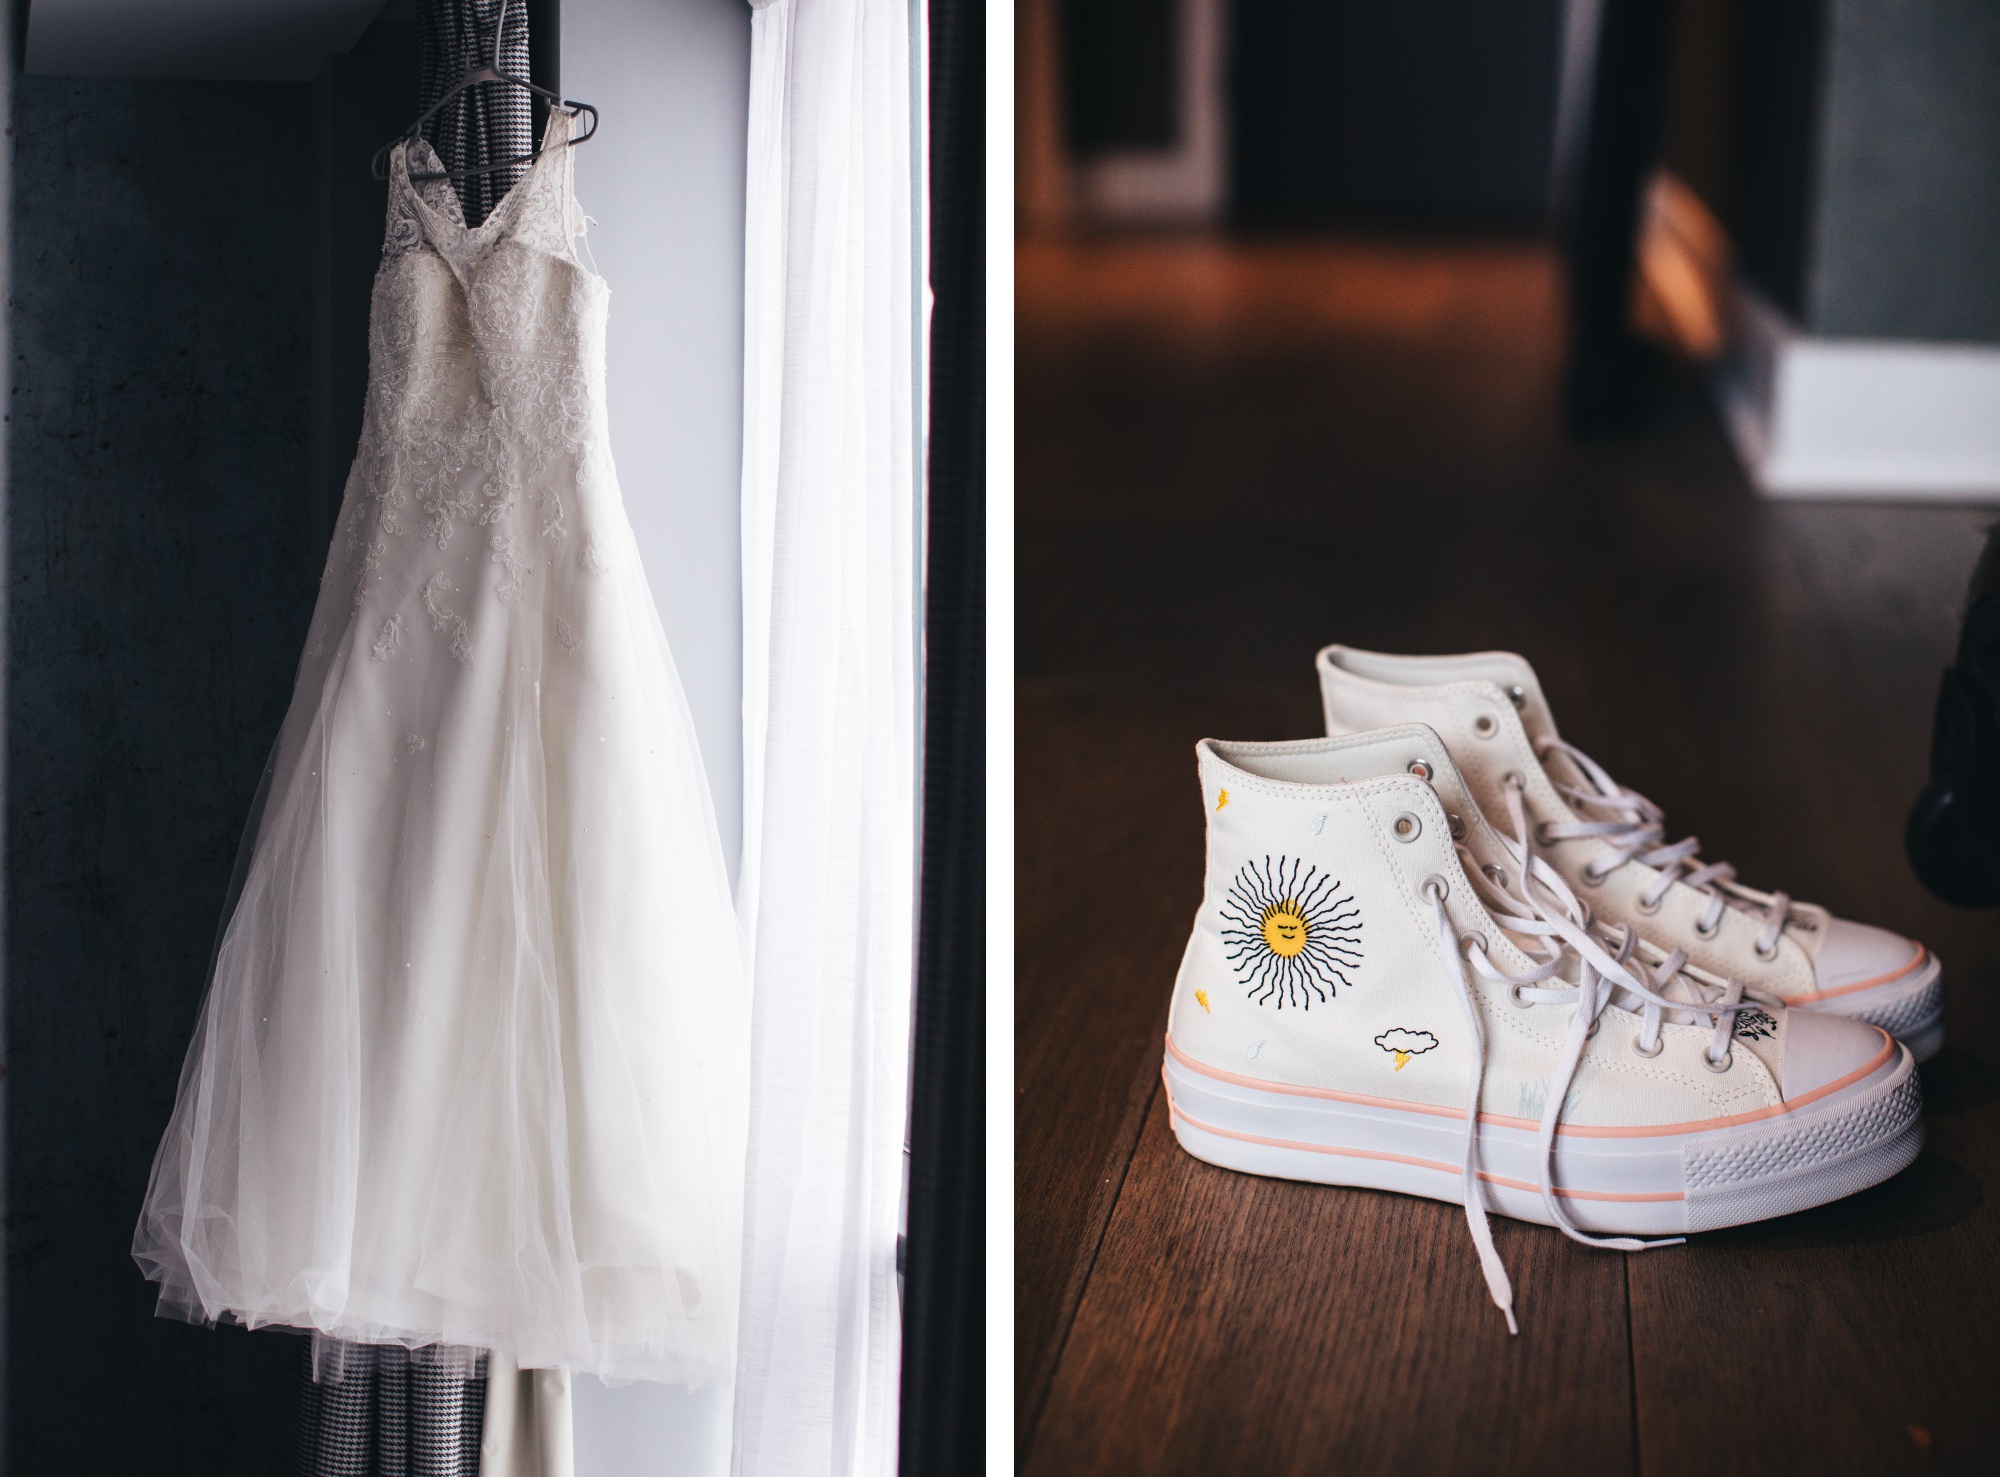 close up details, wedding dress and white wedding plimsolls, trainers